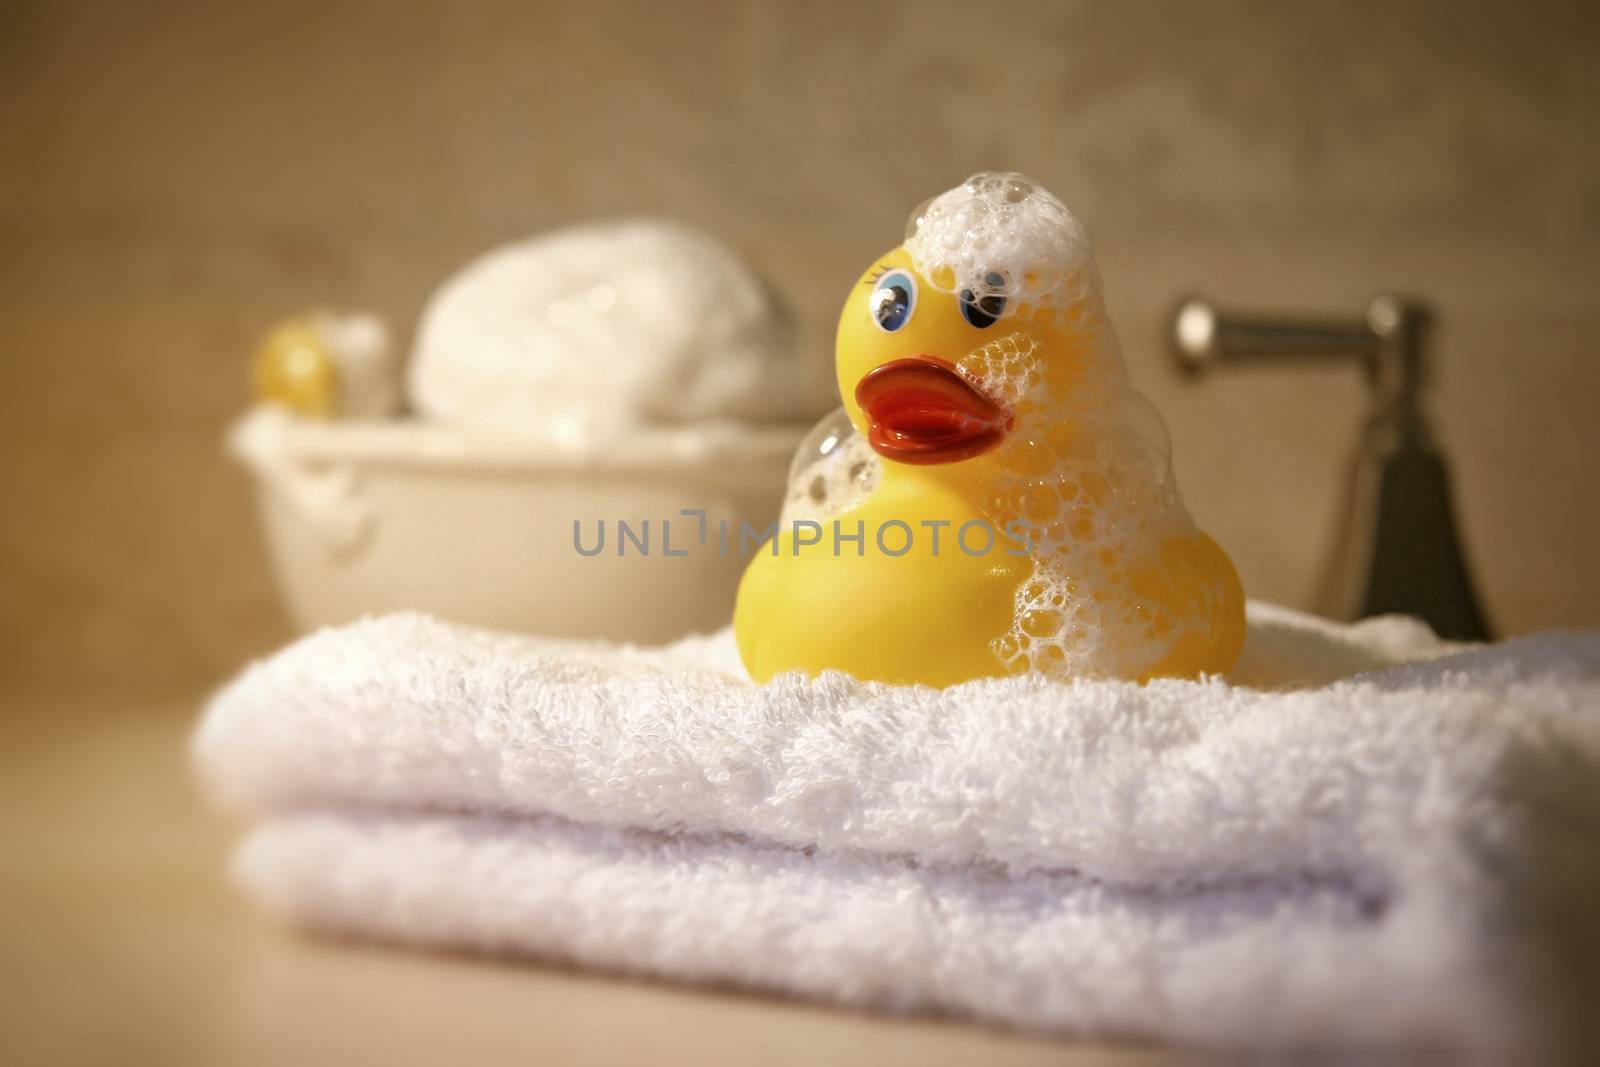 Bath time with soap and rubber ducky